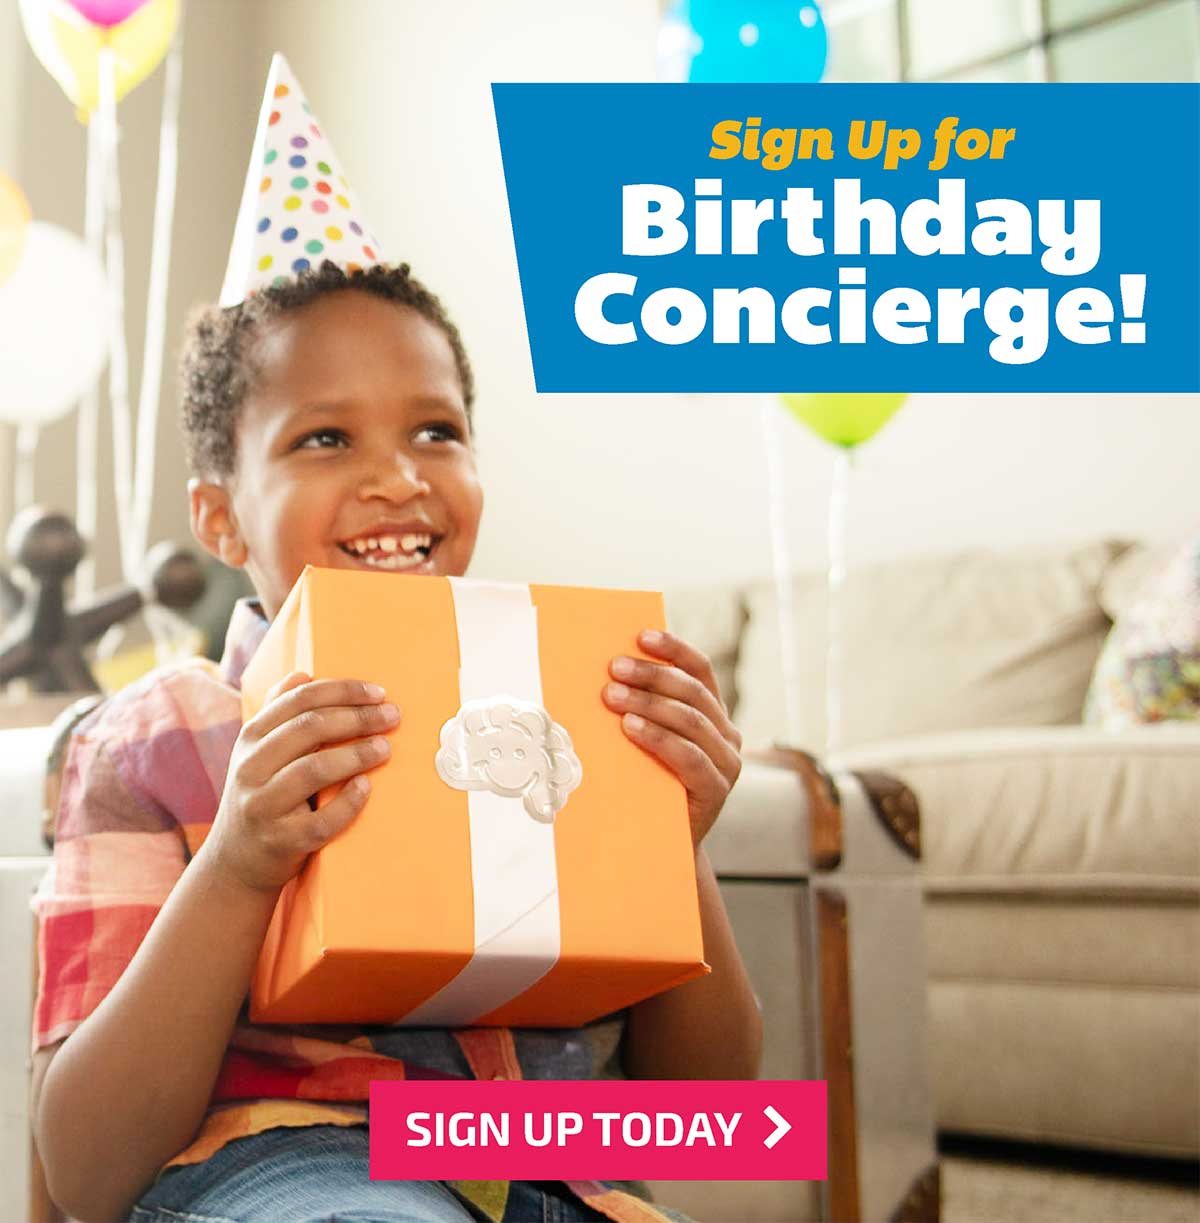 Sign Up for Birthday Concierge!